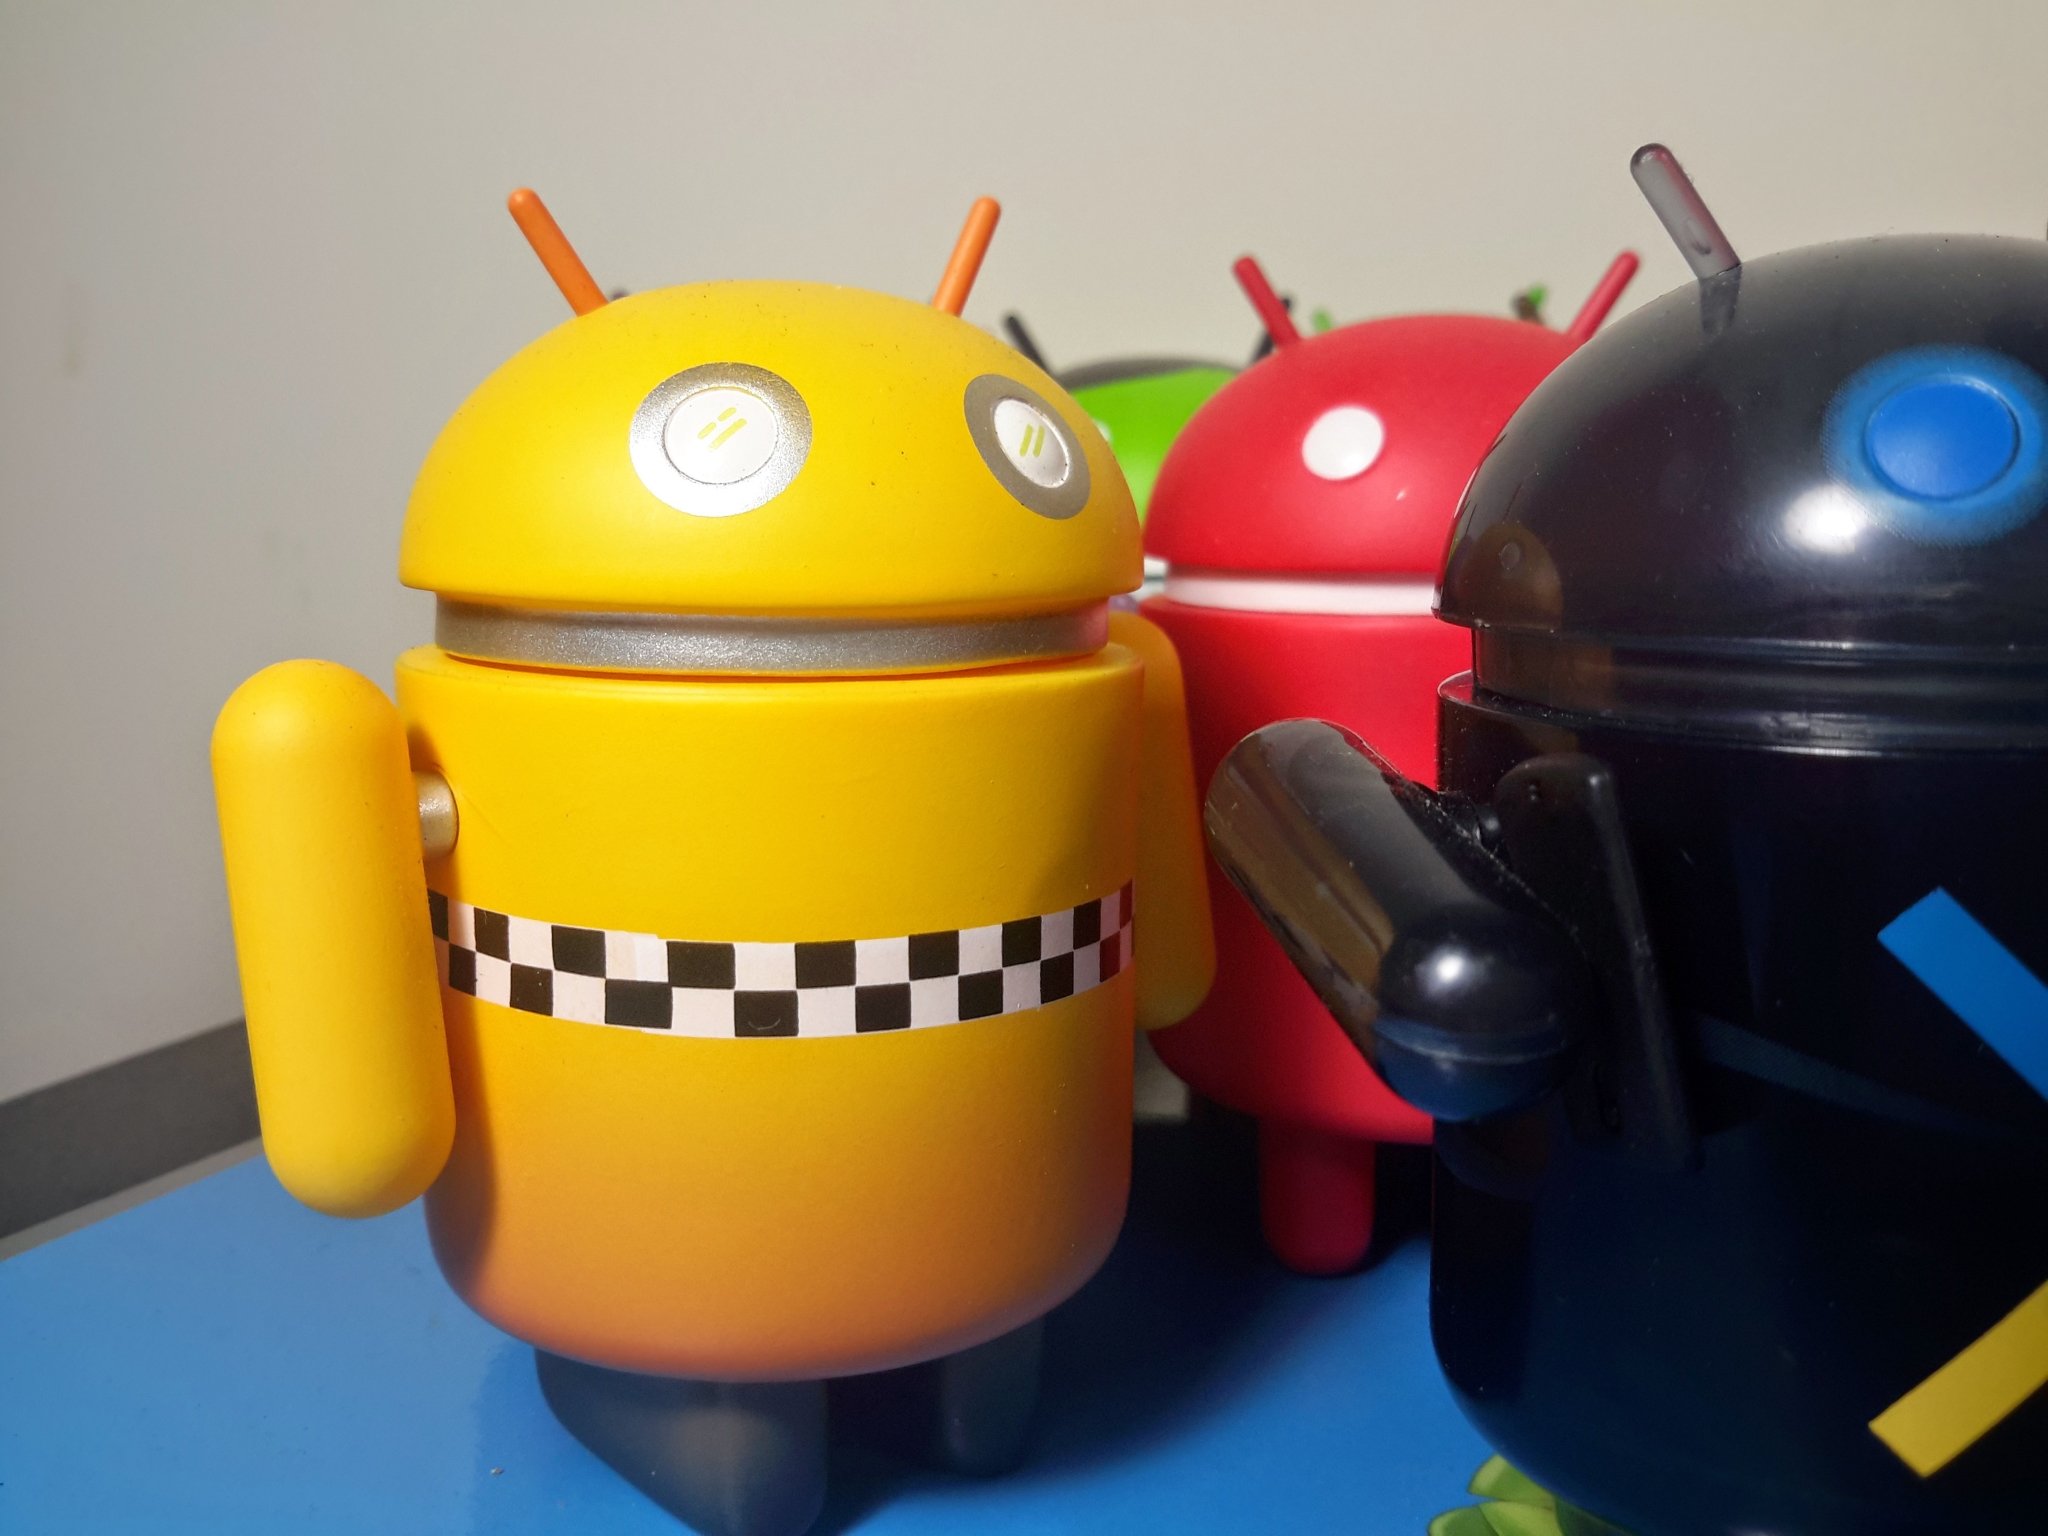 Wee little Android guys